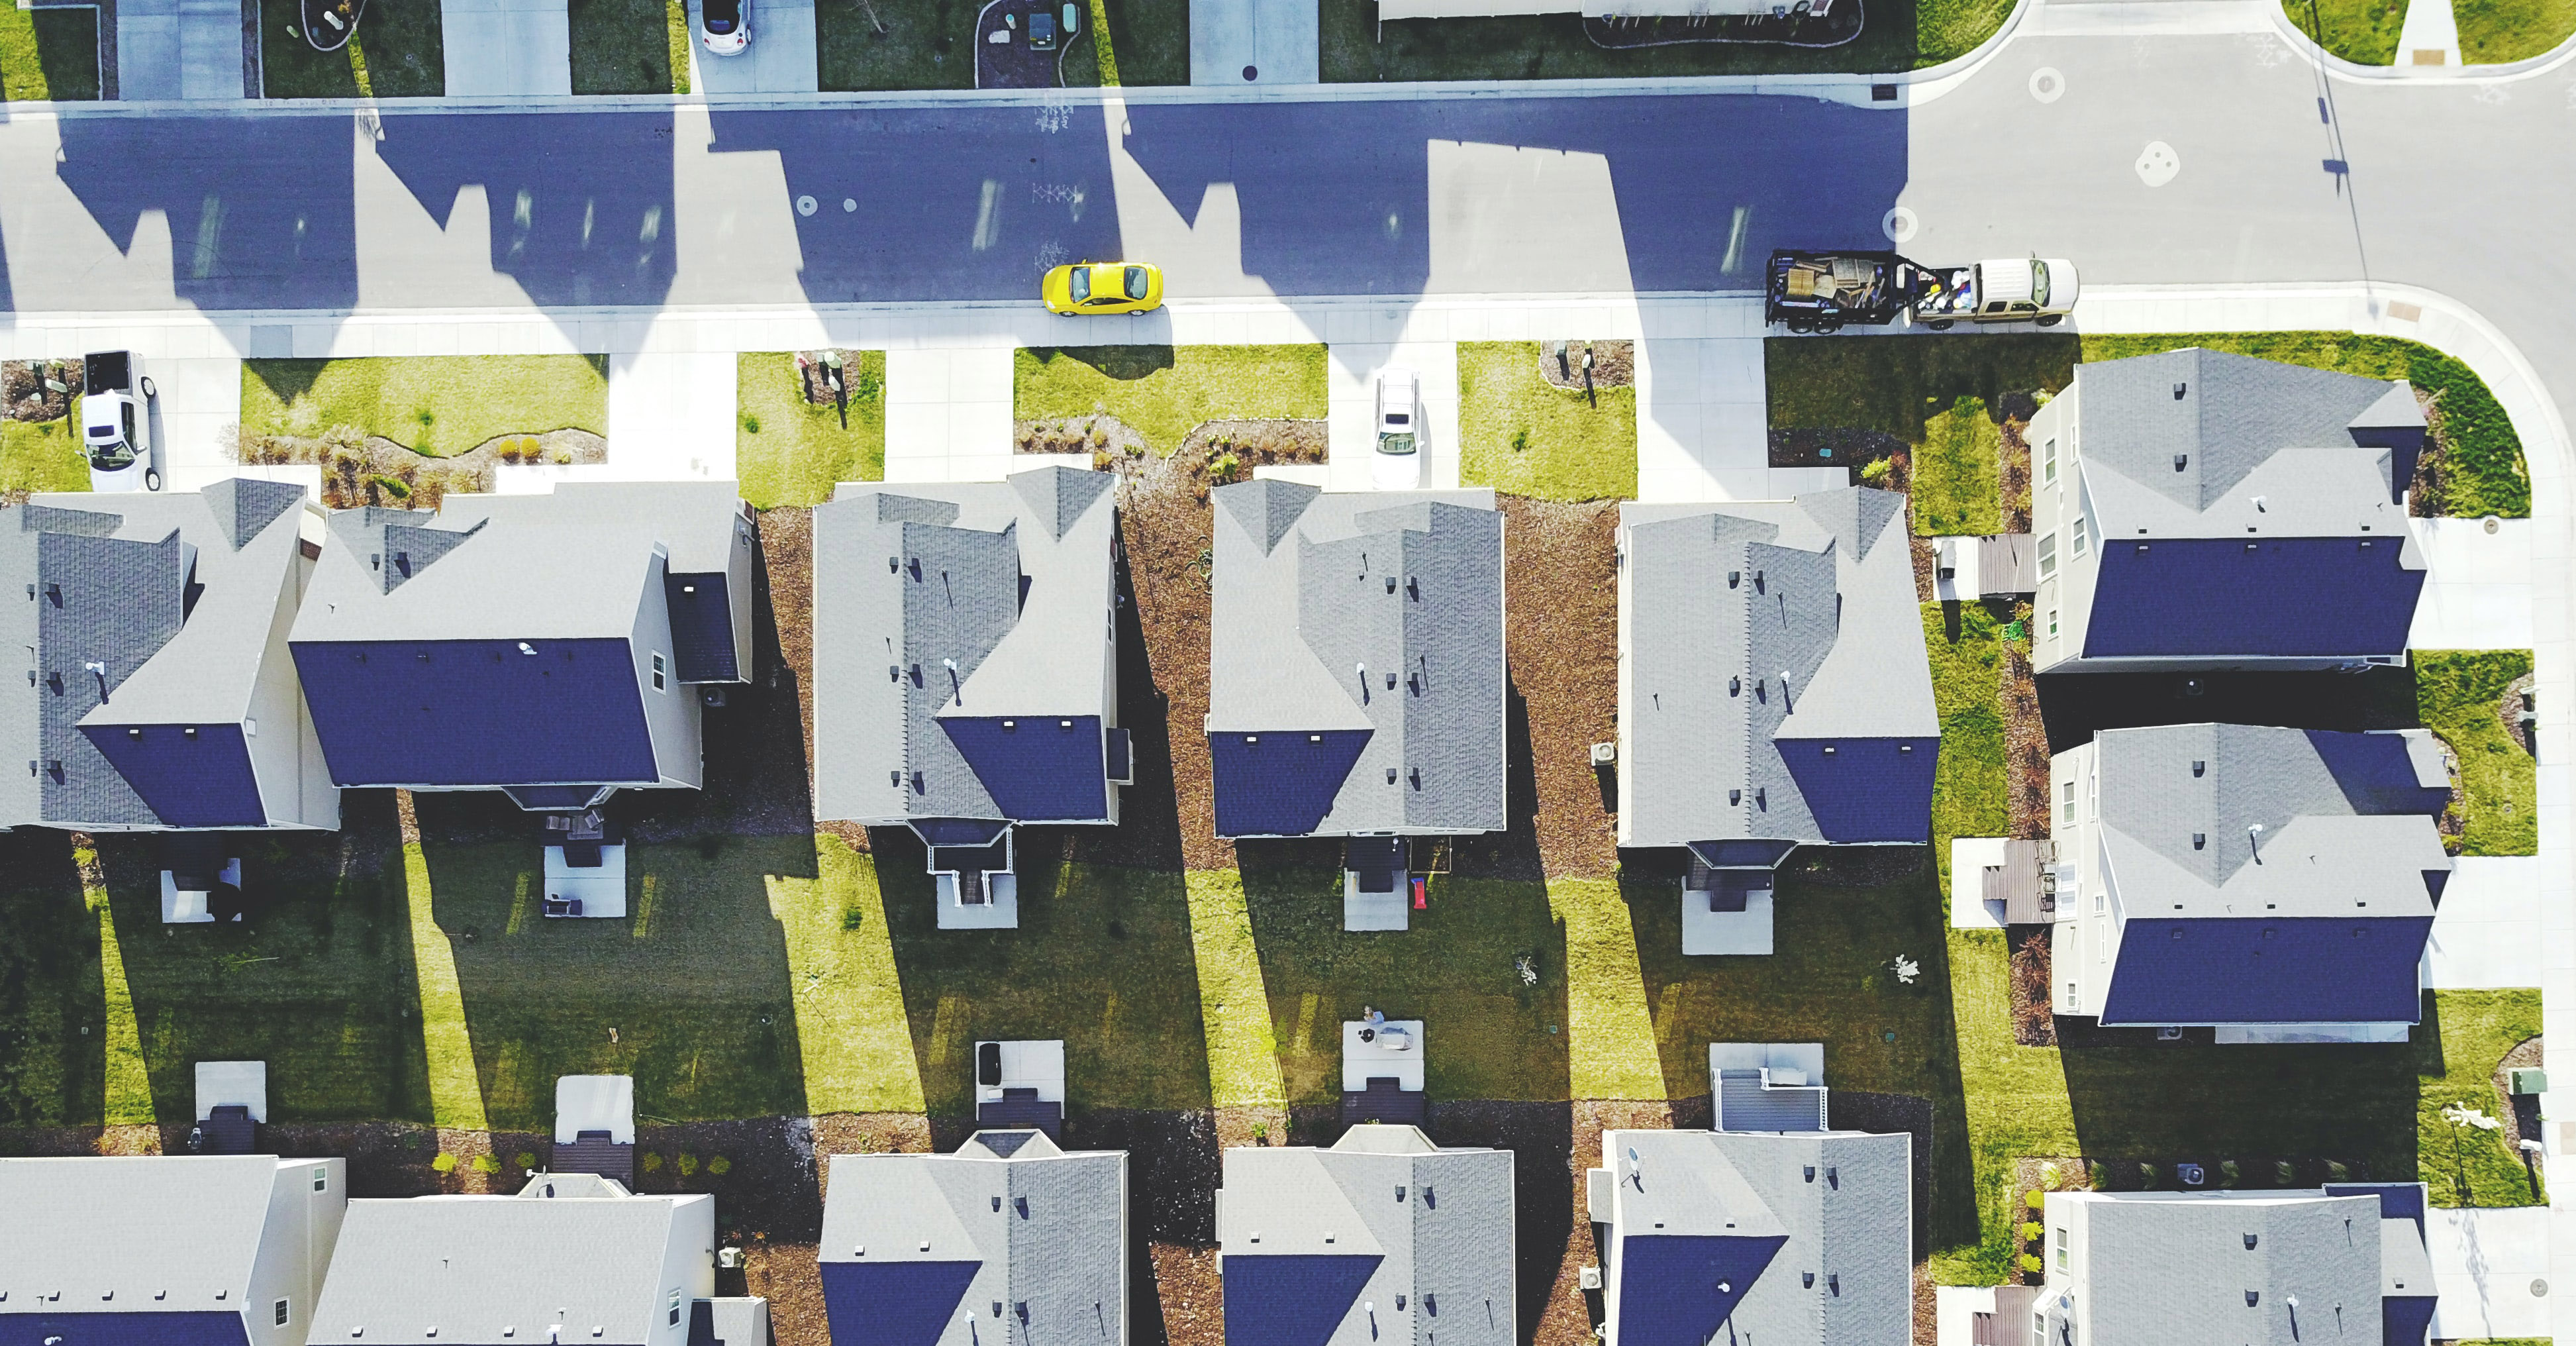 An overhead sky view of a subdivision.